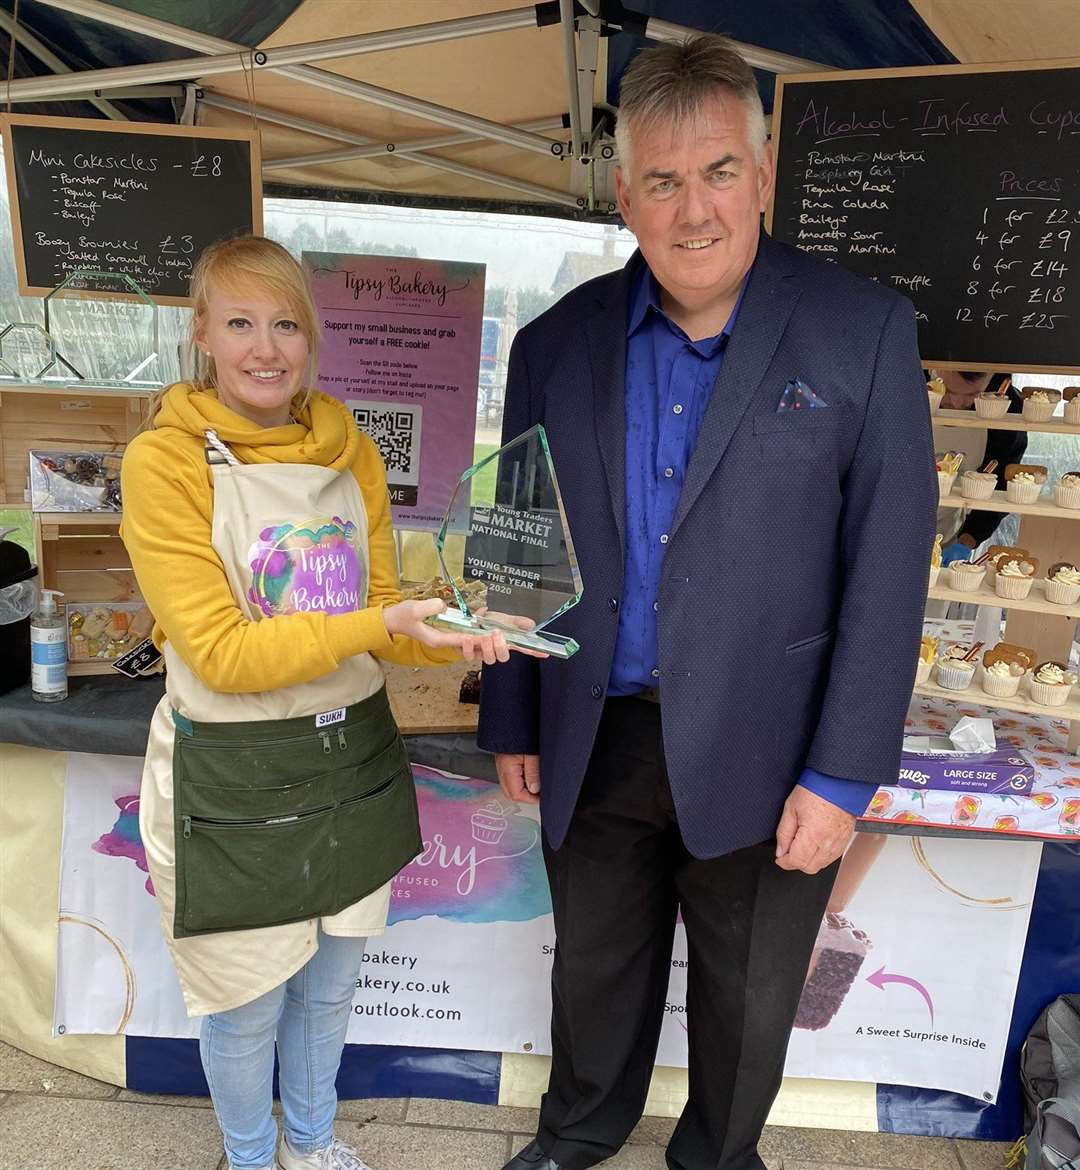 Emma Rus, of the Tipsy Bakery, with David Preston, chief executive of The National Association of British Markets